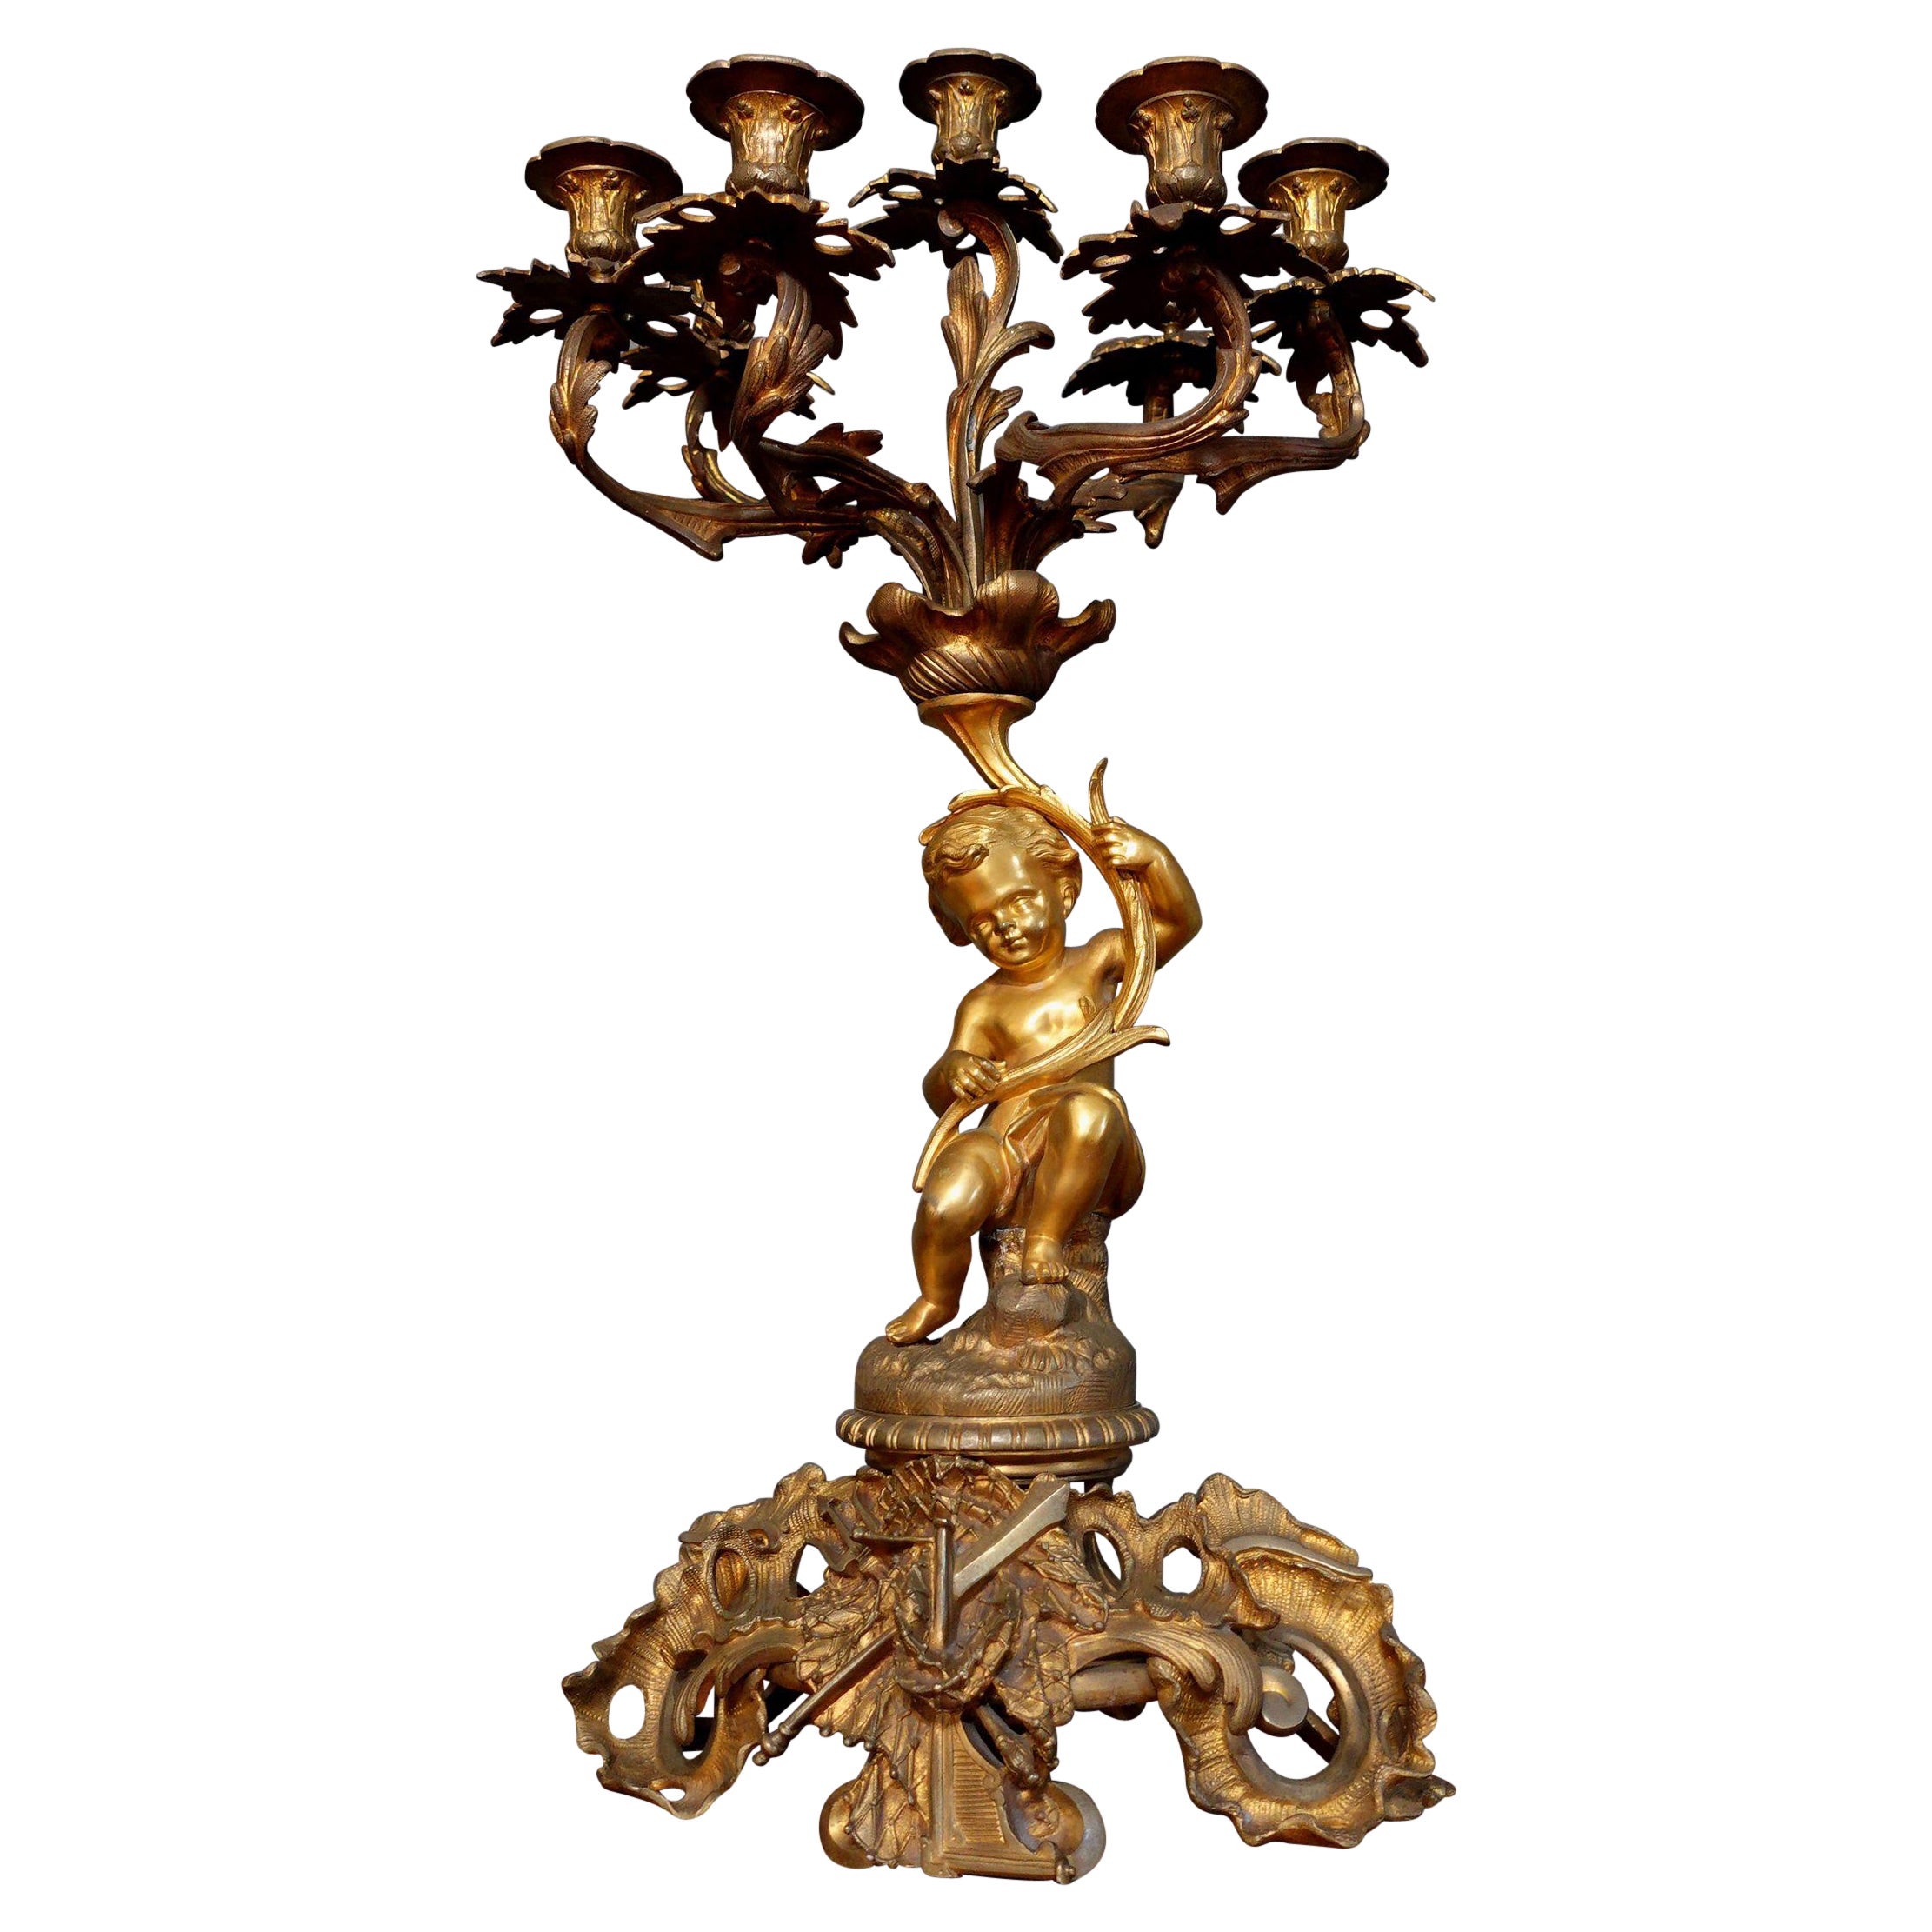 Large 19th Century French Louis XV Bronze Candelabras with seating Putti